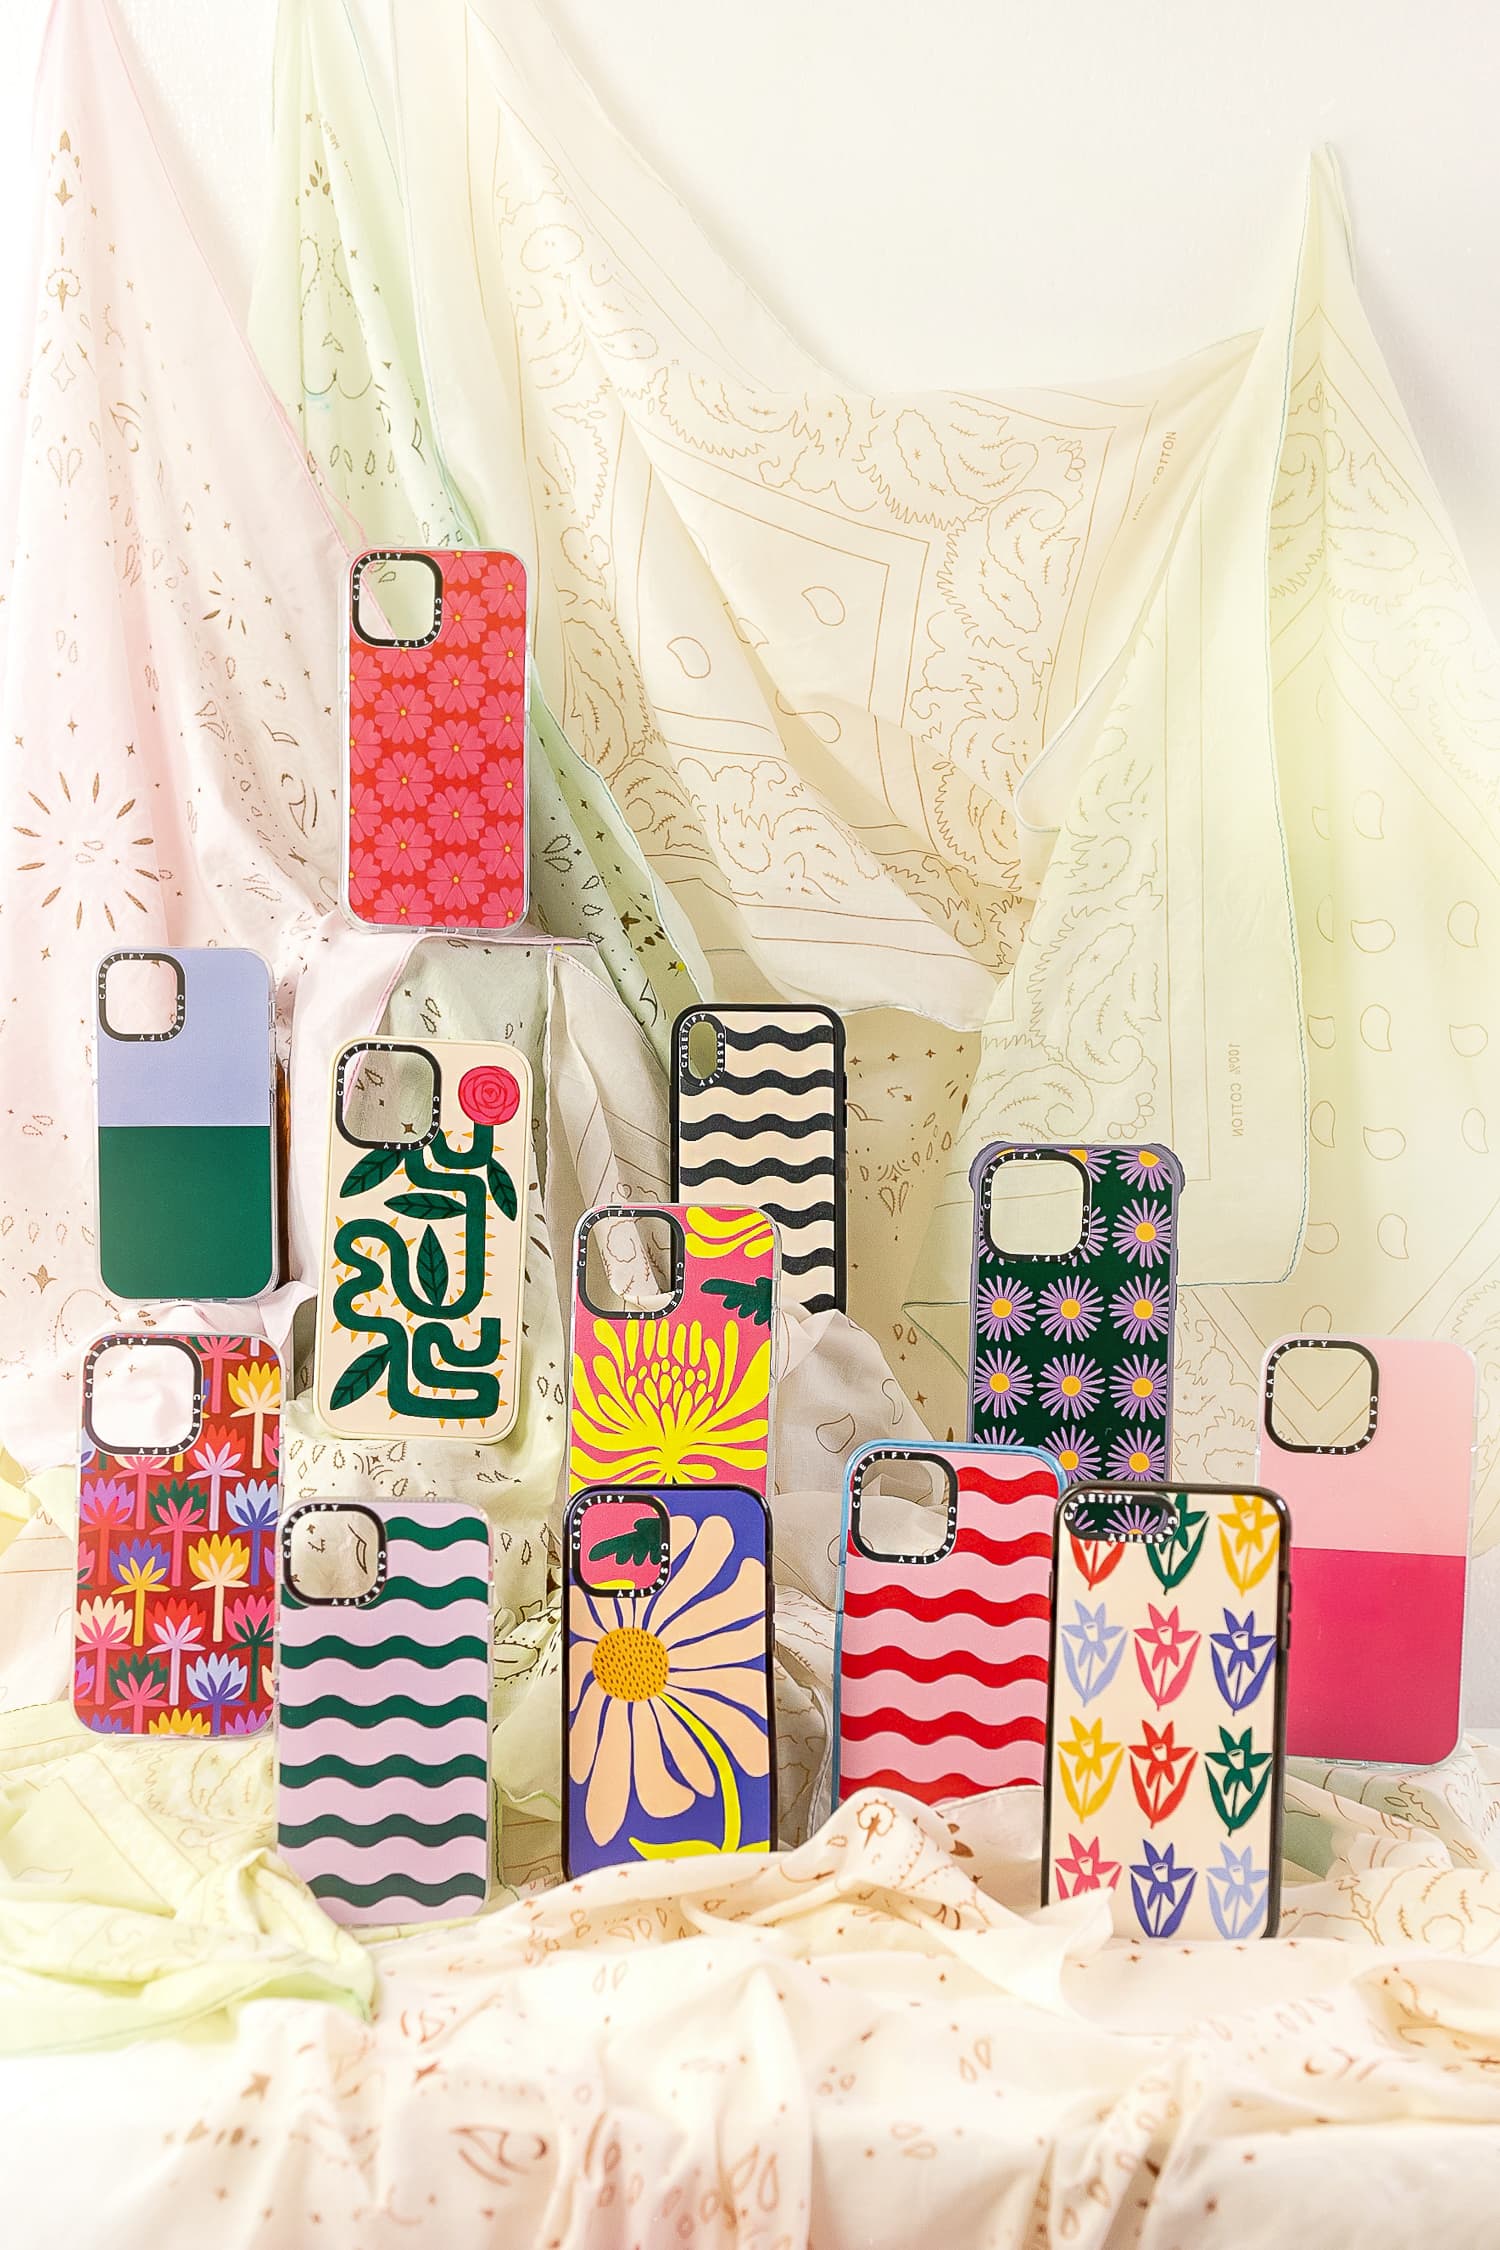 Our new Daring Floral Casetify assortment | Digital Noch